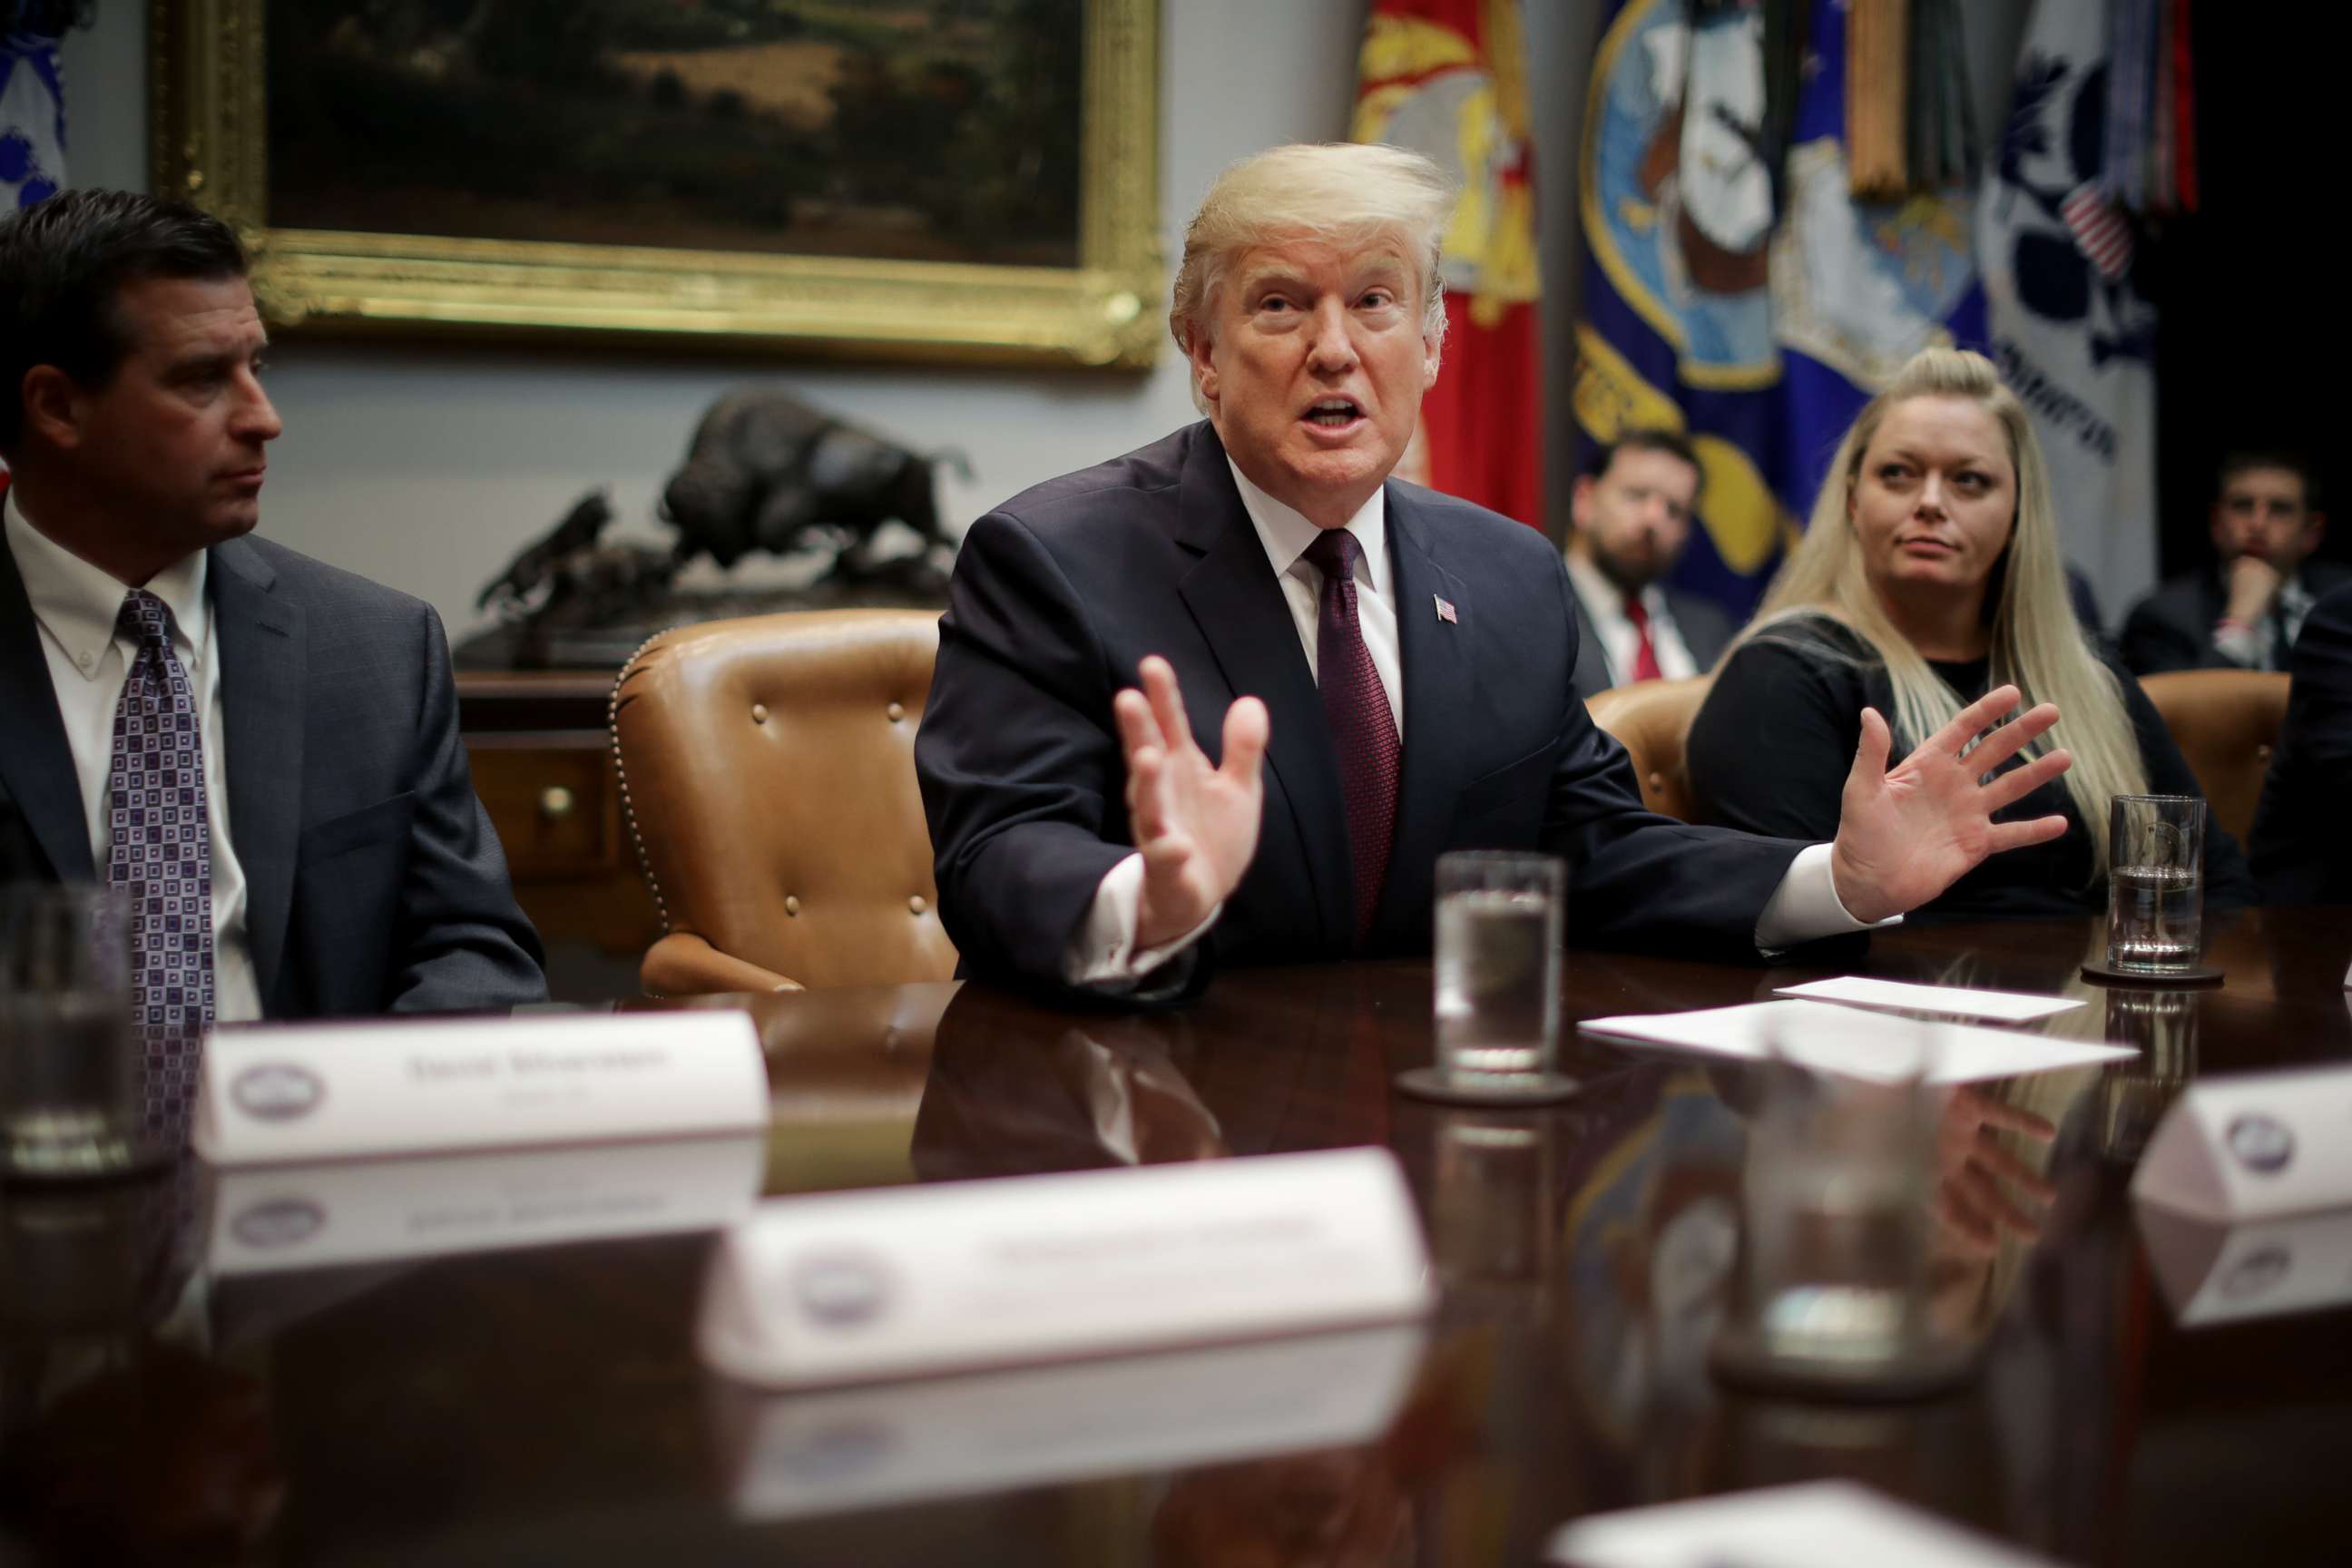 PHOTO: President Donald Trump delivers remarks to reporters while participating in a round table about pricing in healthcare in the Roosevelt Room at the White House, Jan. 23, 2019 in Washington.